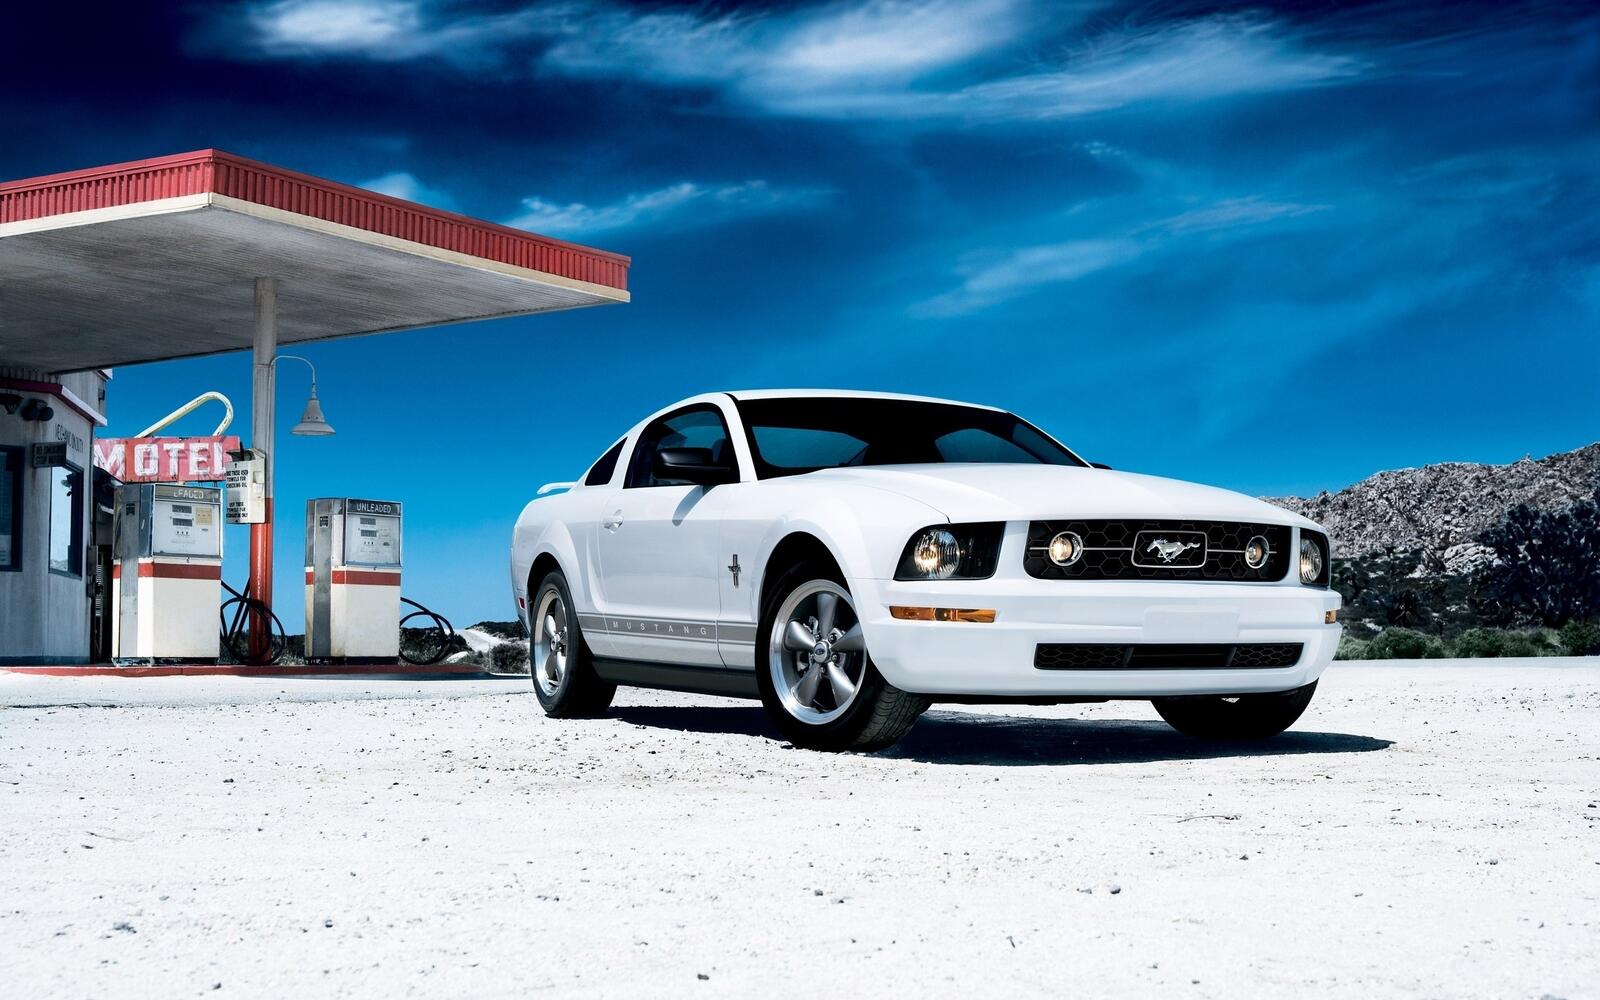 Wallpapers wallpaper ford mustang muscle cars white on the desktop